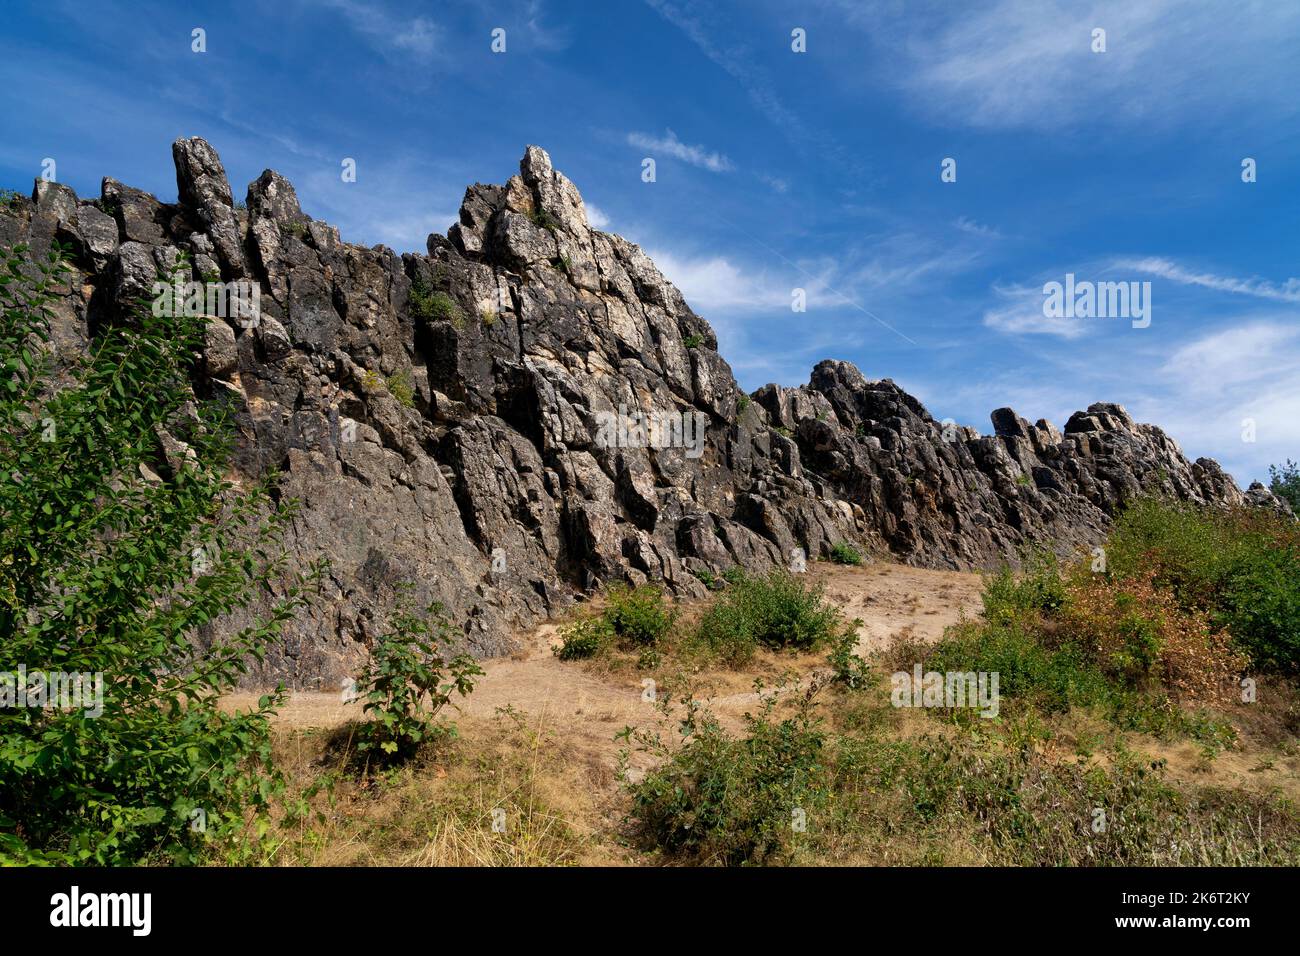 The Eschbacher Klippen is a rock formation in Germany Stock Photo